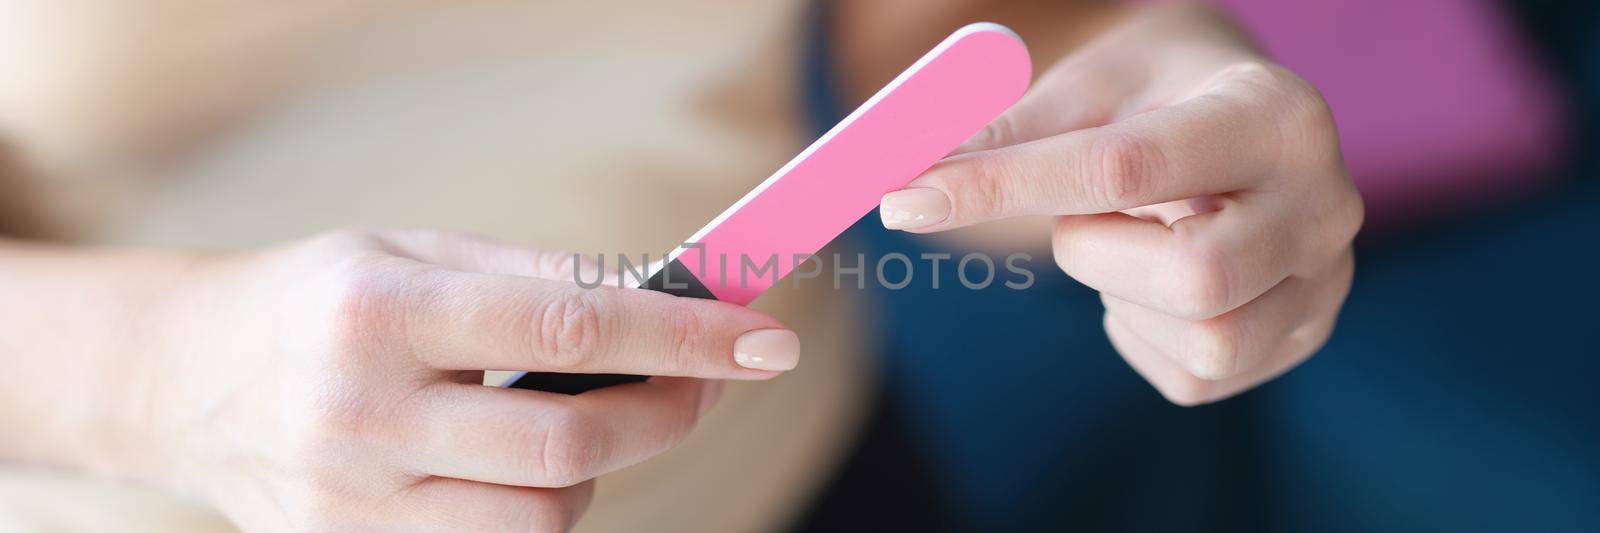 Woman holding a nail file, female hands with manicure by kuprevich